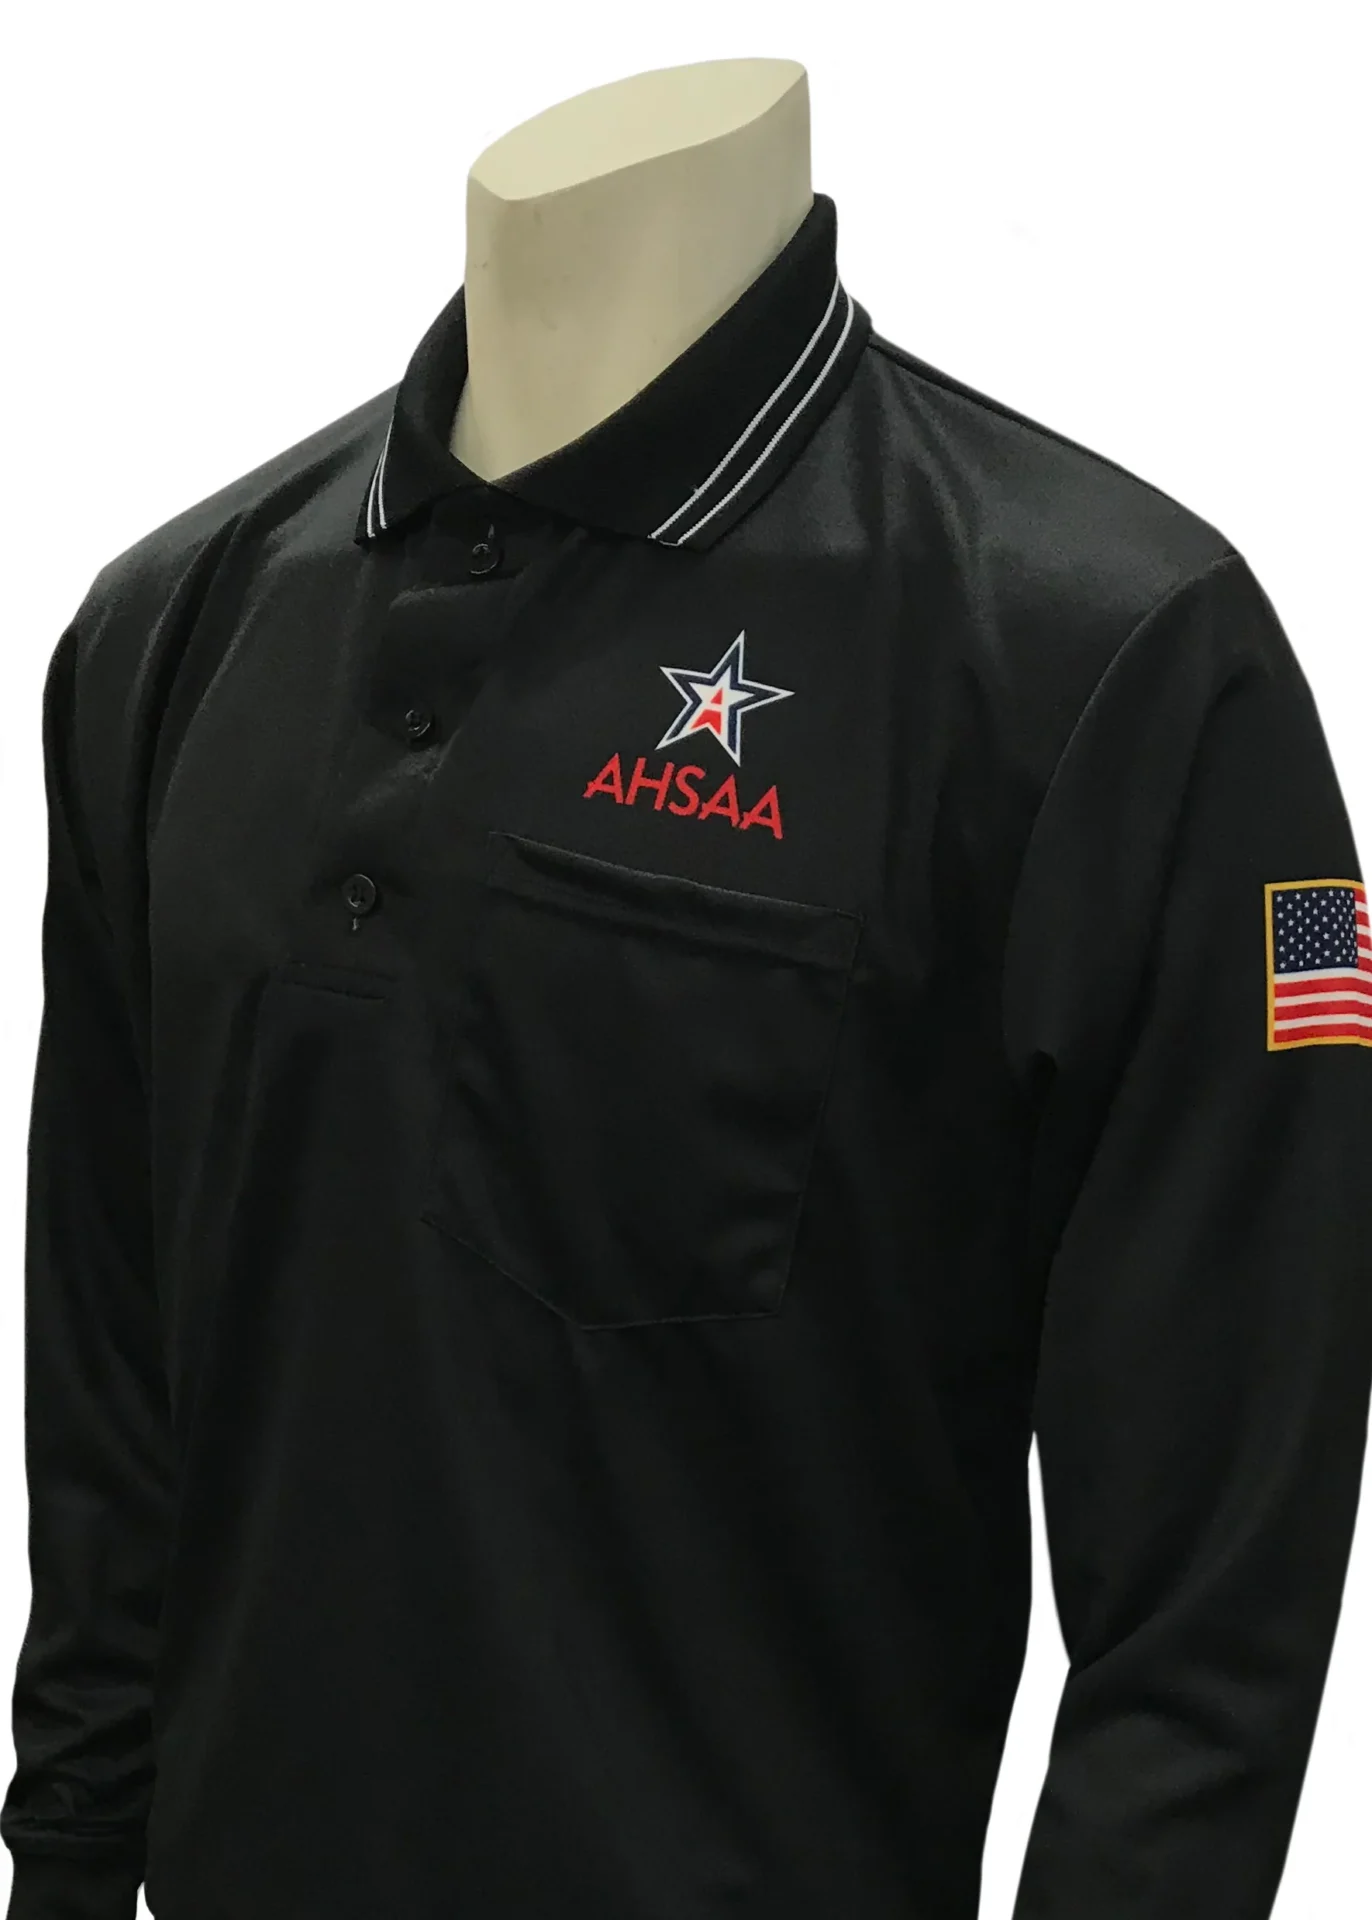 A black long sleeve shirt with an american flag on the front.